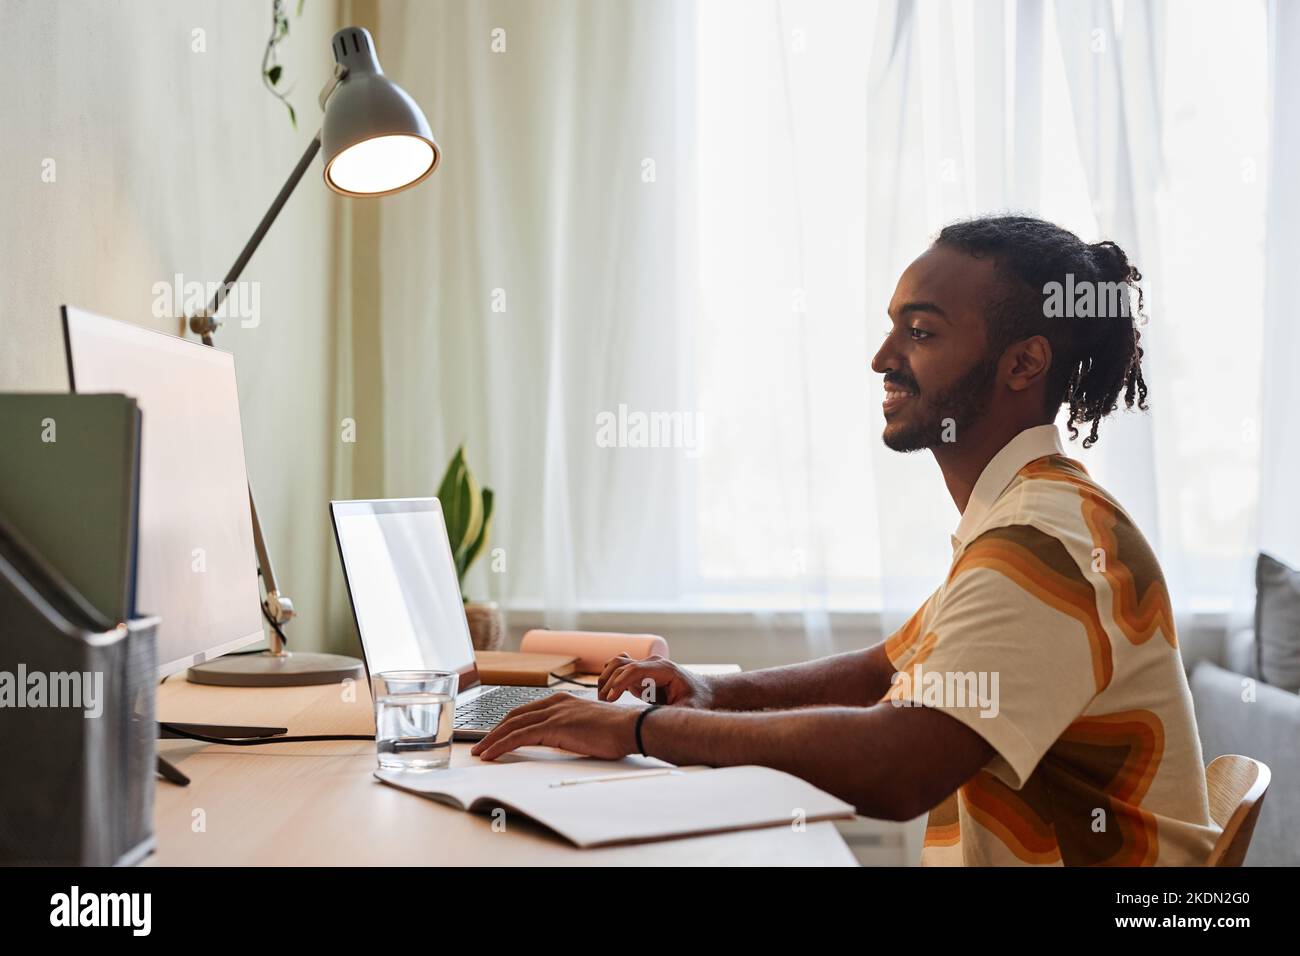 Side view portrait of creative black man smiling during online meeting with team at home office, copy space Stock Photo